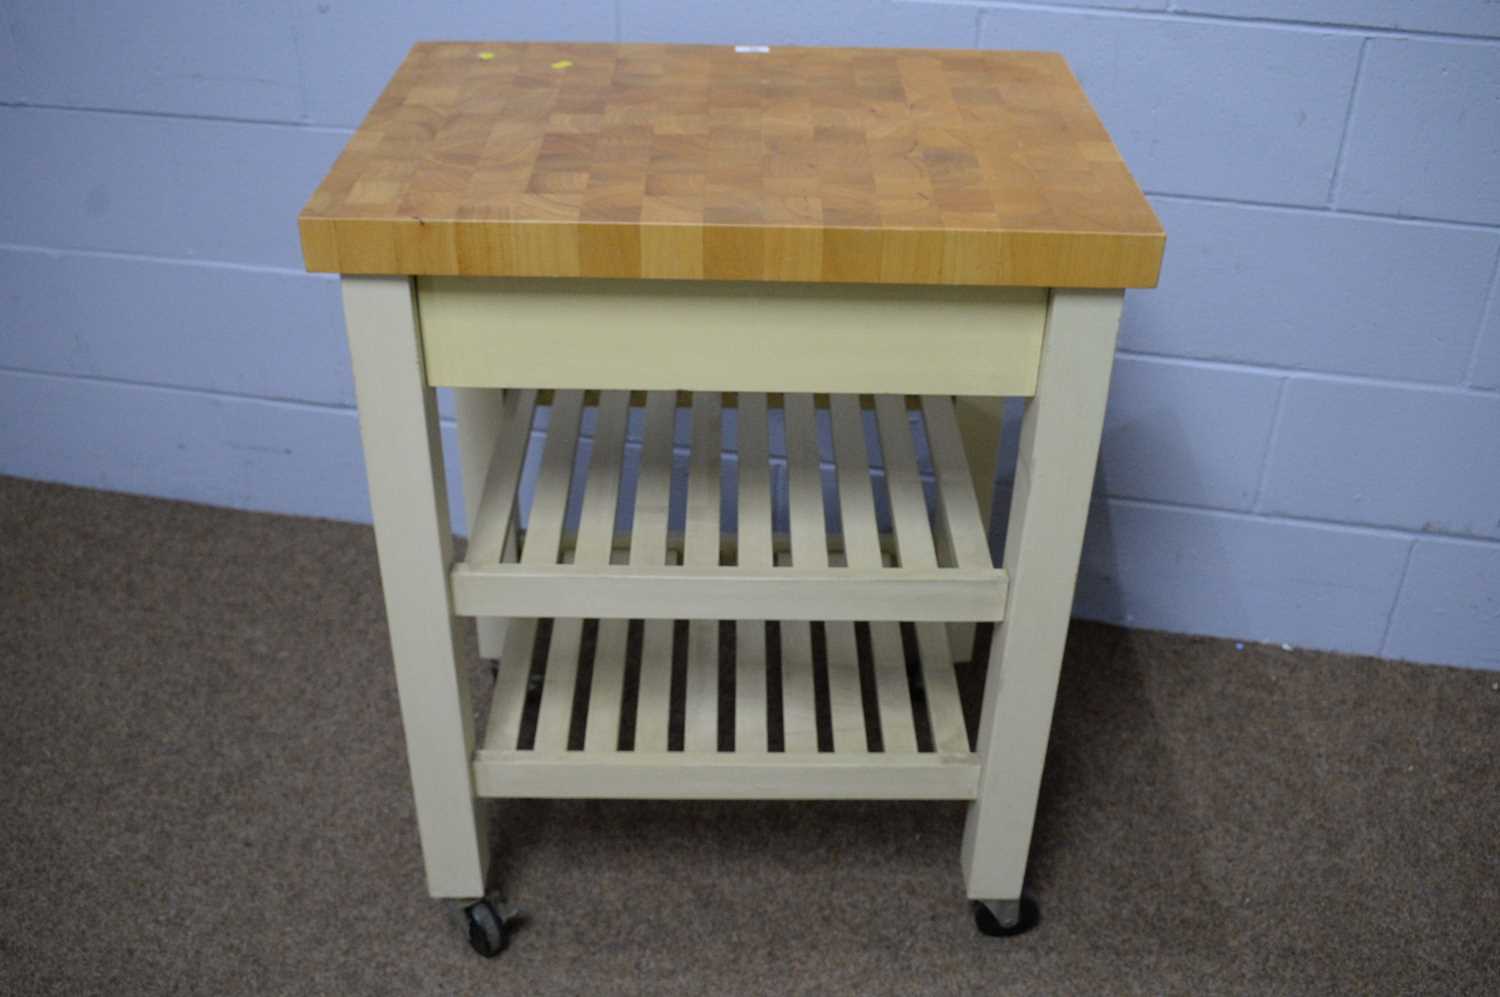 T & G Woodware, Bristol, England: a butcher's style kitchen island. - Image 6 of 7